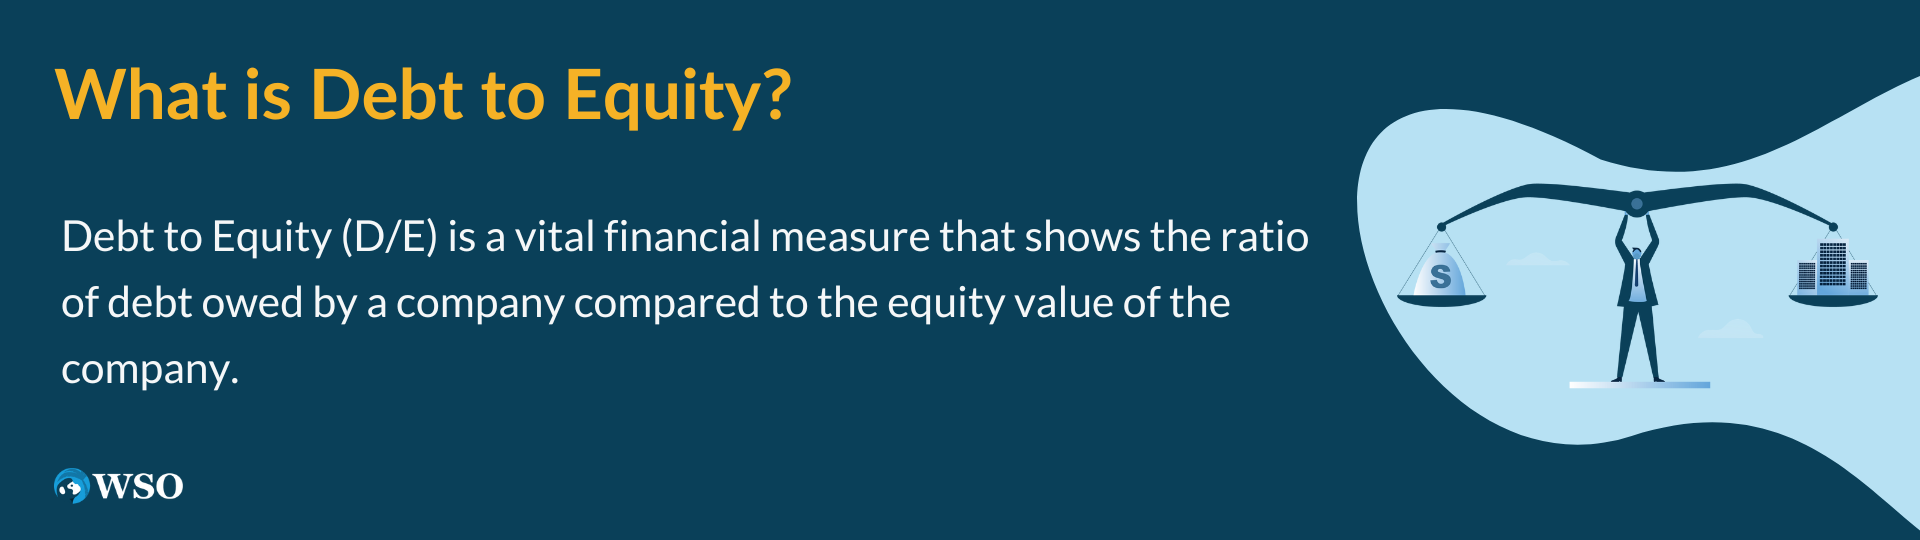 What is Debt to Equity?